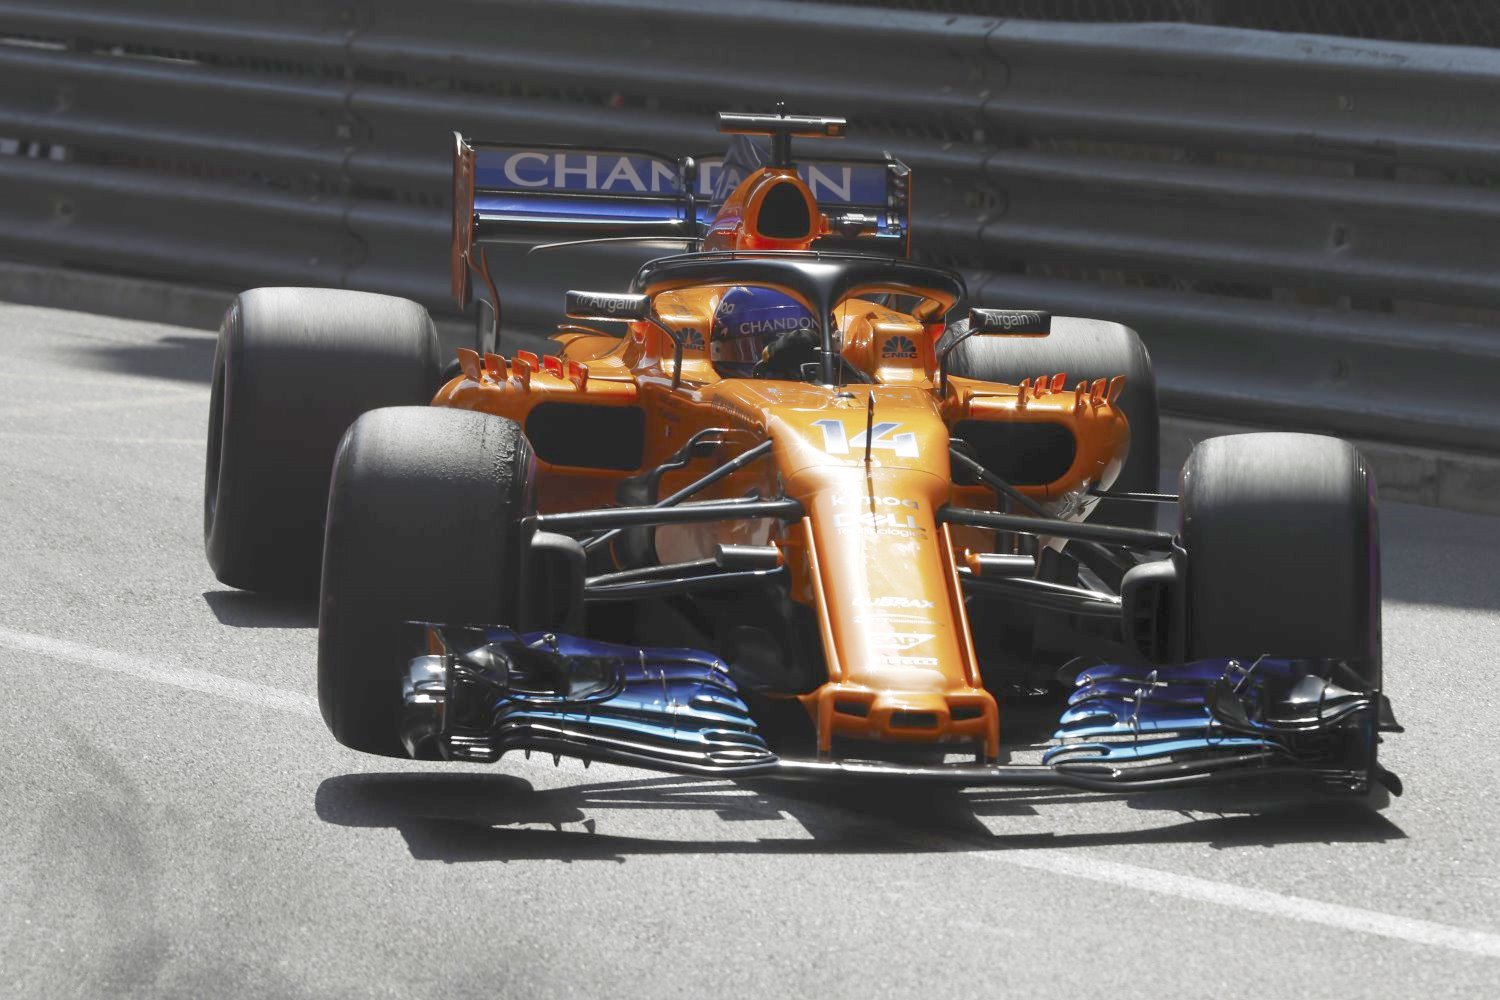 The McLarens are slow not because of Honda or Renault, but because their chassis is inferior